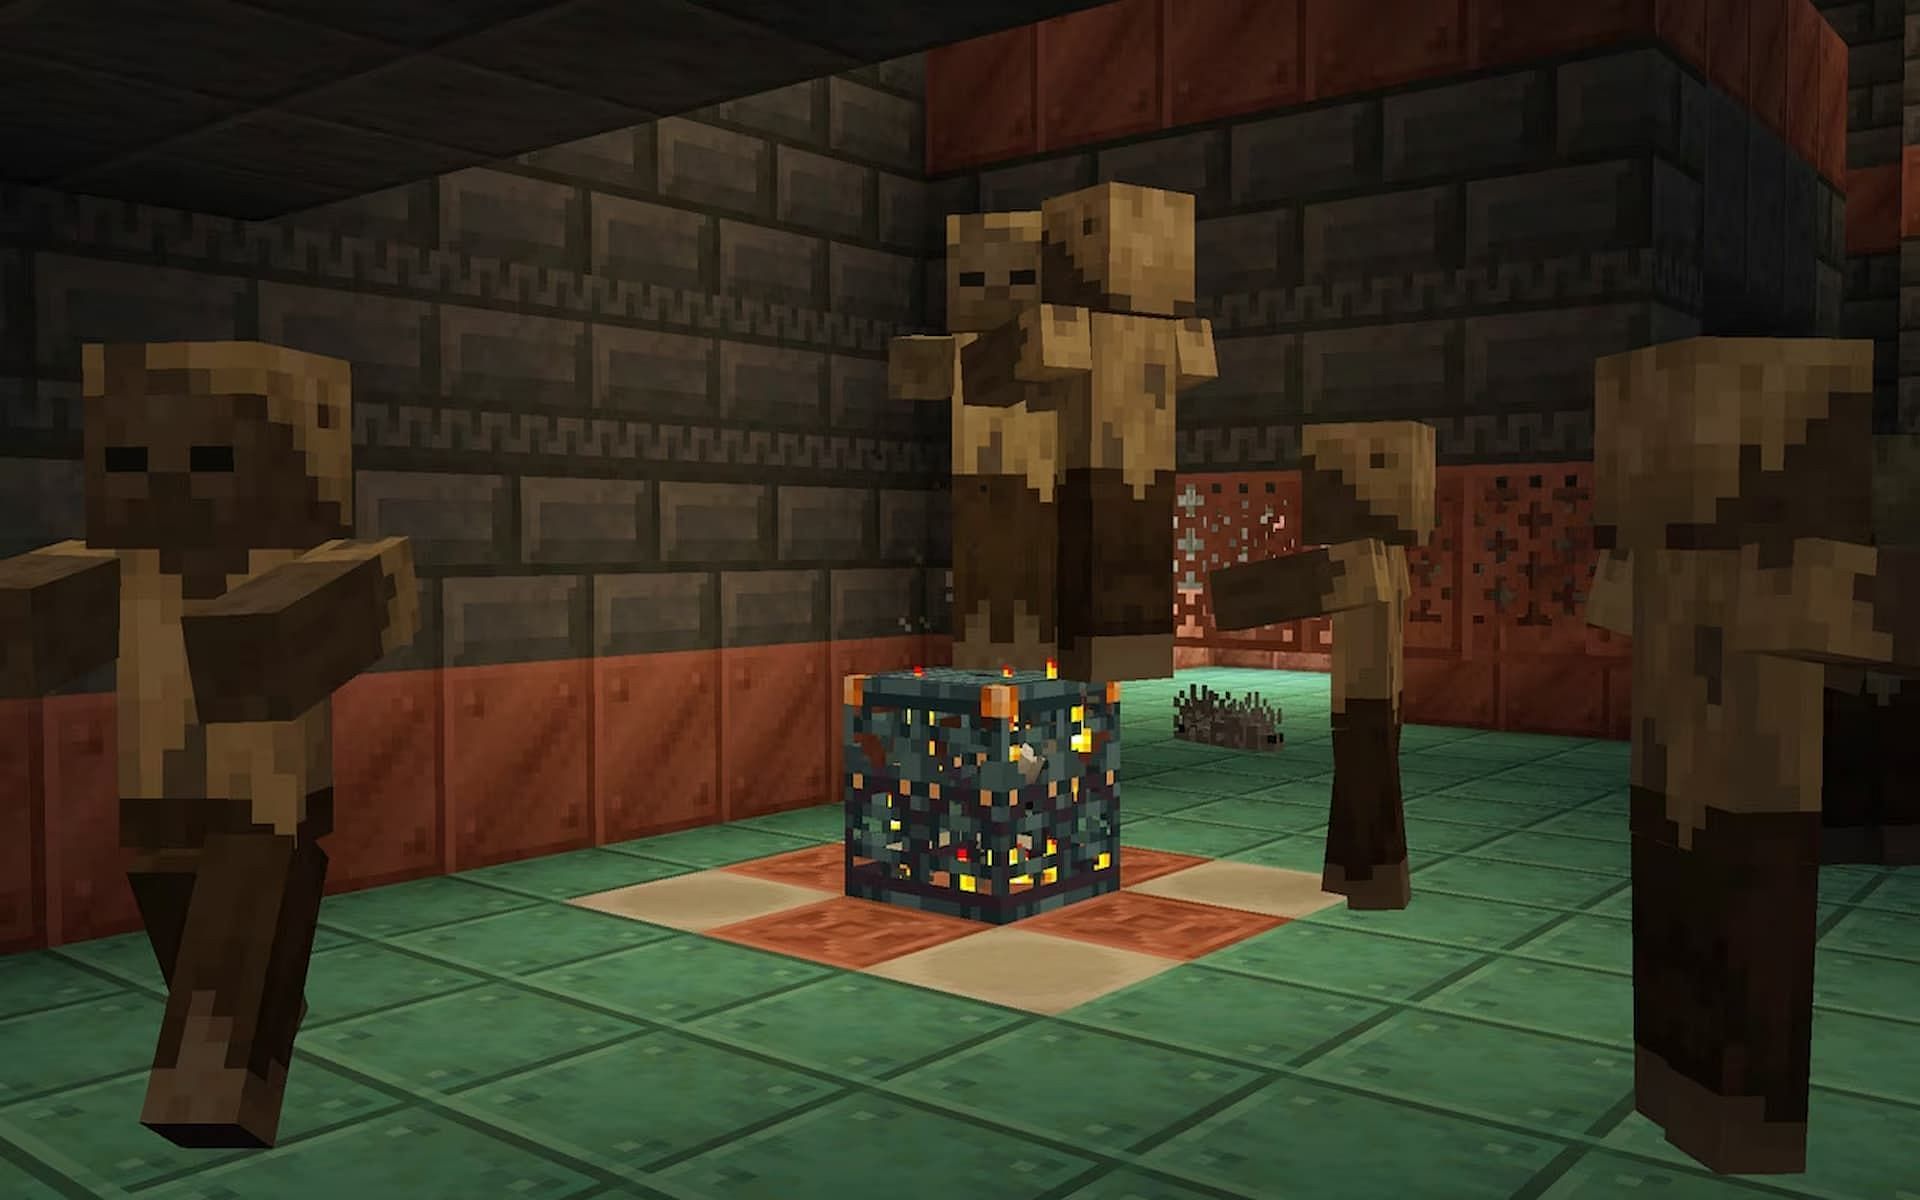 Minecraft players will need to think strategically to overcome the challenges (Image via Mojang)